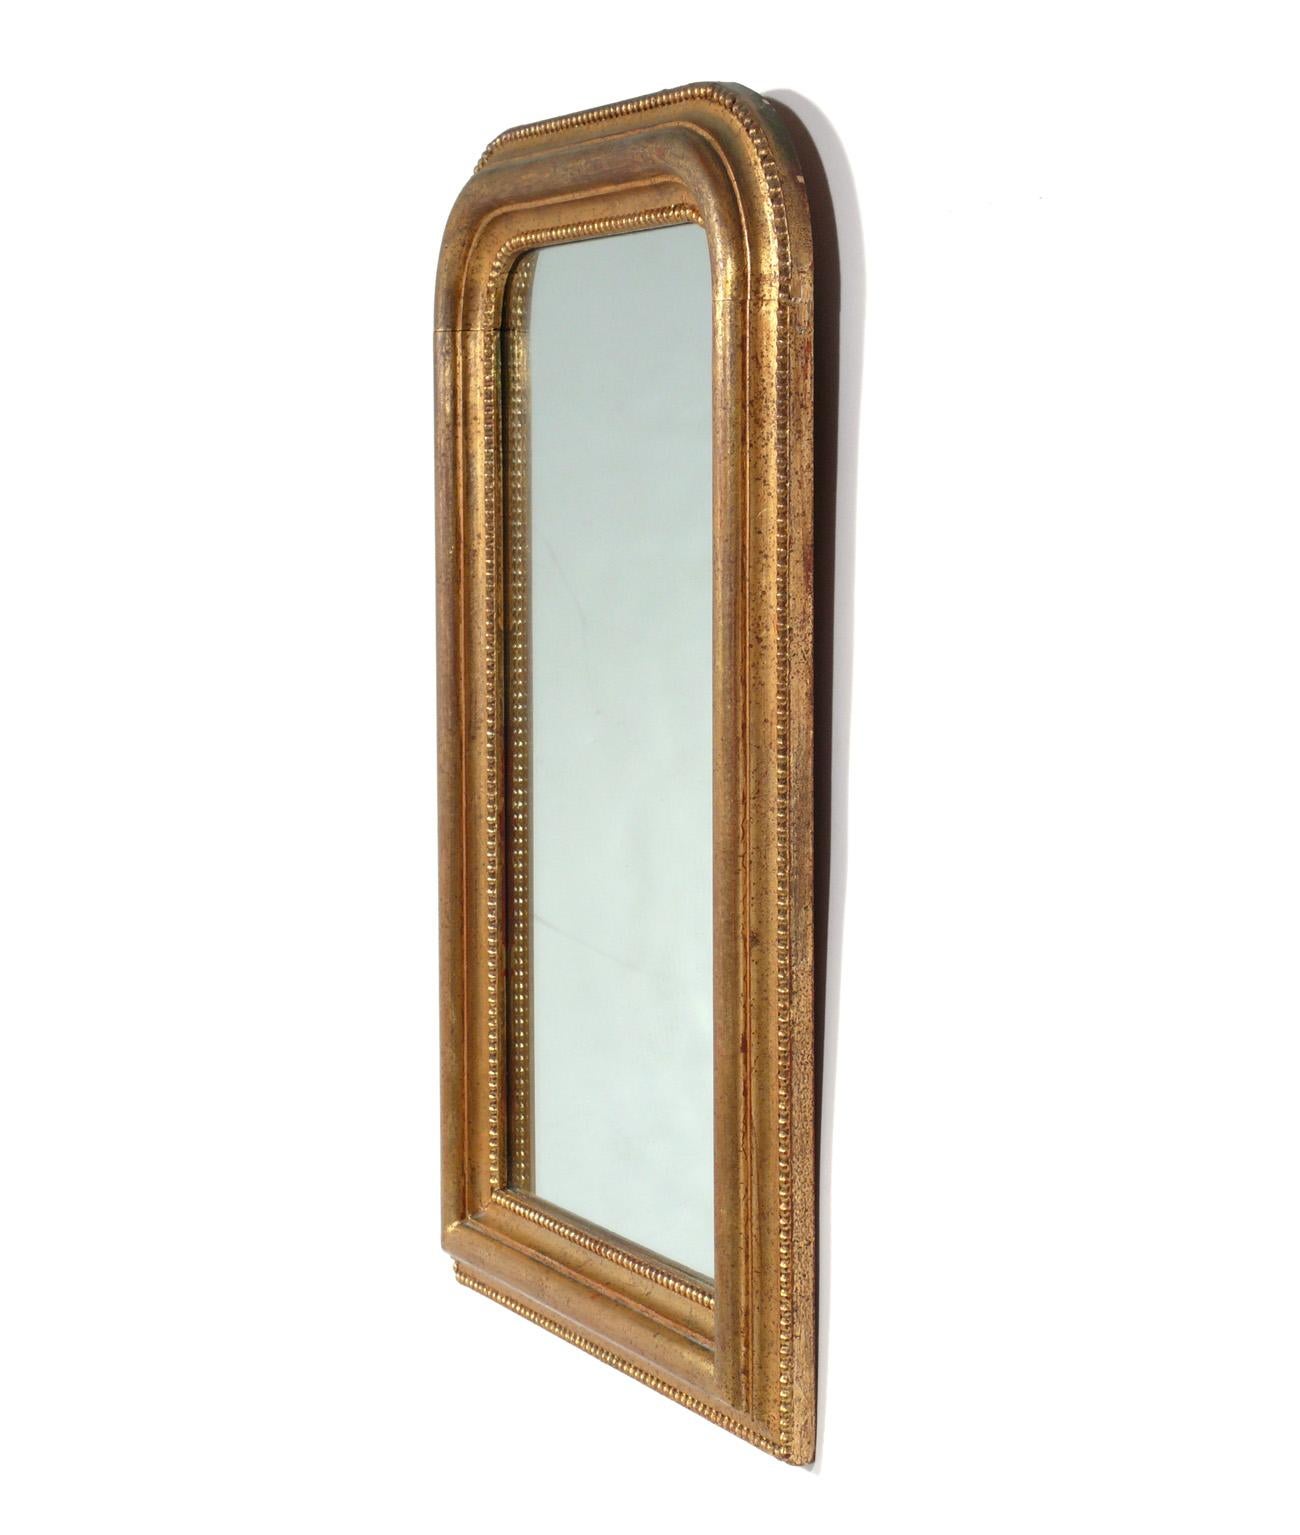 Arched gilt mirror, Italy, circa 1950s. Retains warm original patina to both the original mirror and gilt wood frame. It is a petite size, measuring 31